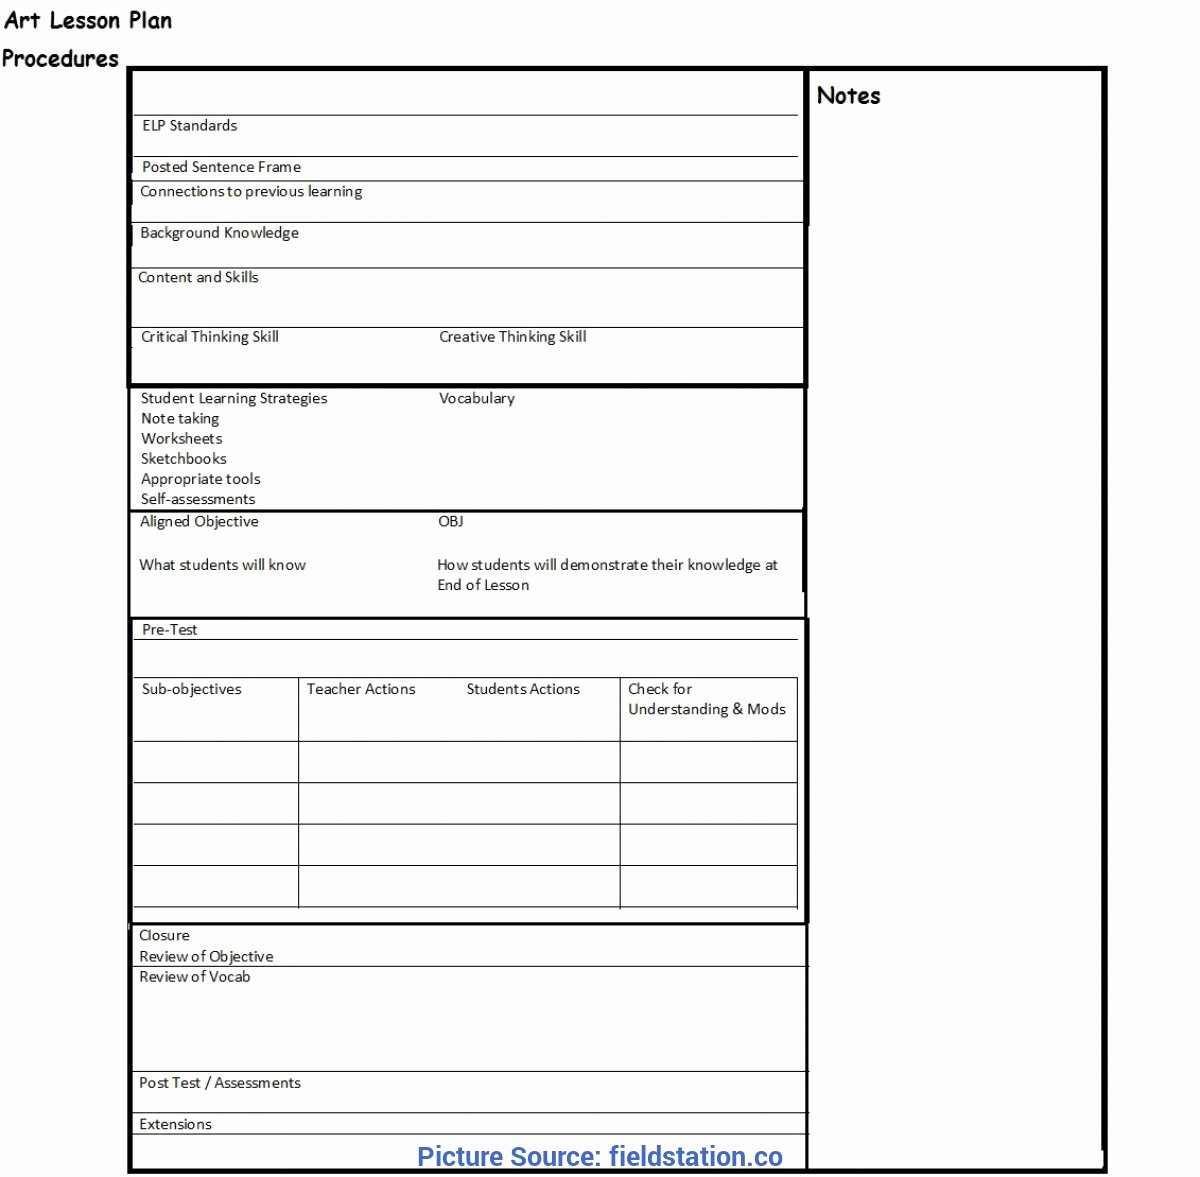 Weekly Lesson Plan Template Elementary New Excellent Weekly Lesson Plan Templates for Elementary